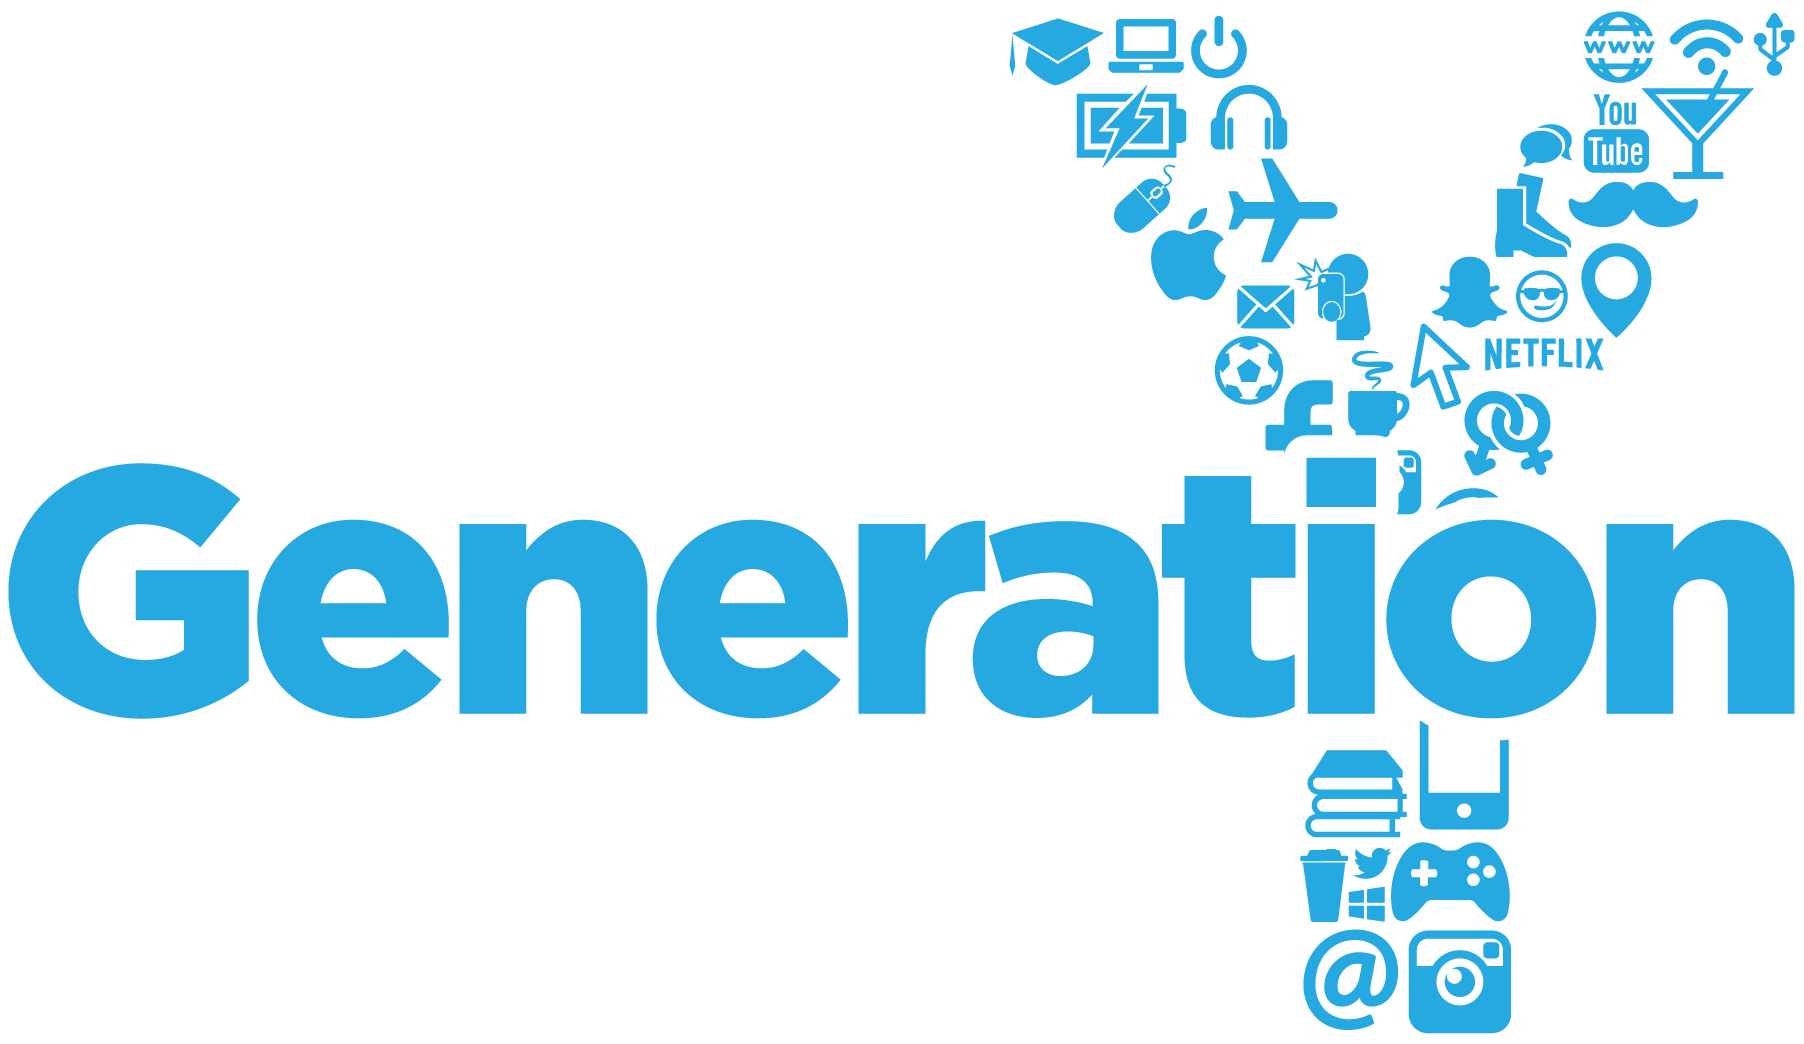 Graphic image representing 'Generation Y' The Y is made up of social media and other popular icons and sits behind the word, Generation.